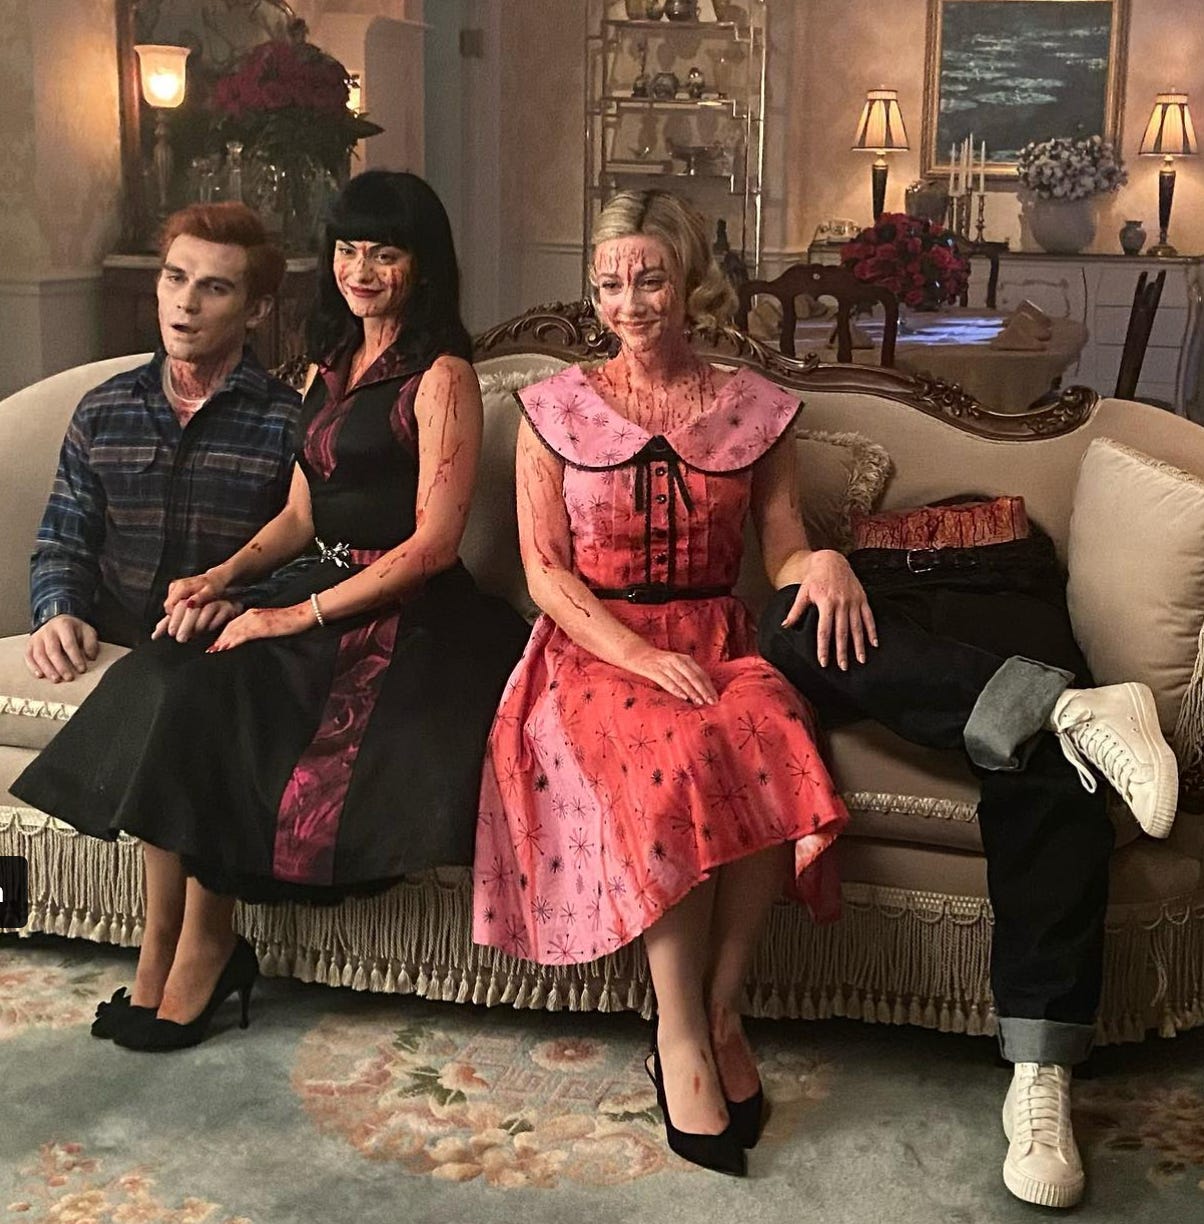 An image of Archie Andrews, sawed in half, with a bloody Veronica and Betty sitting on a couch and smiling.